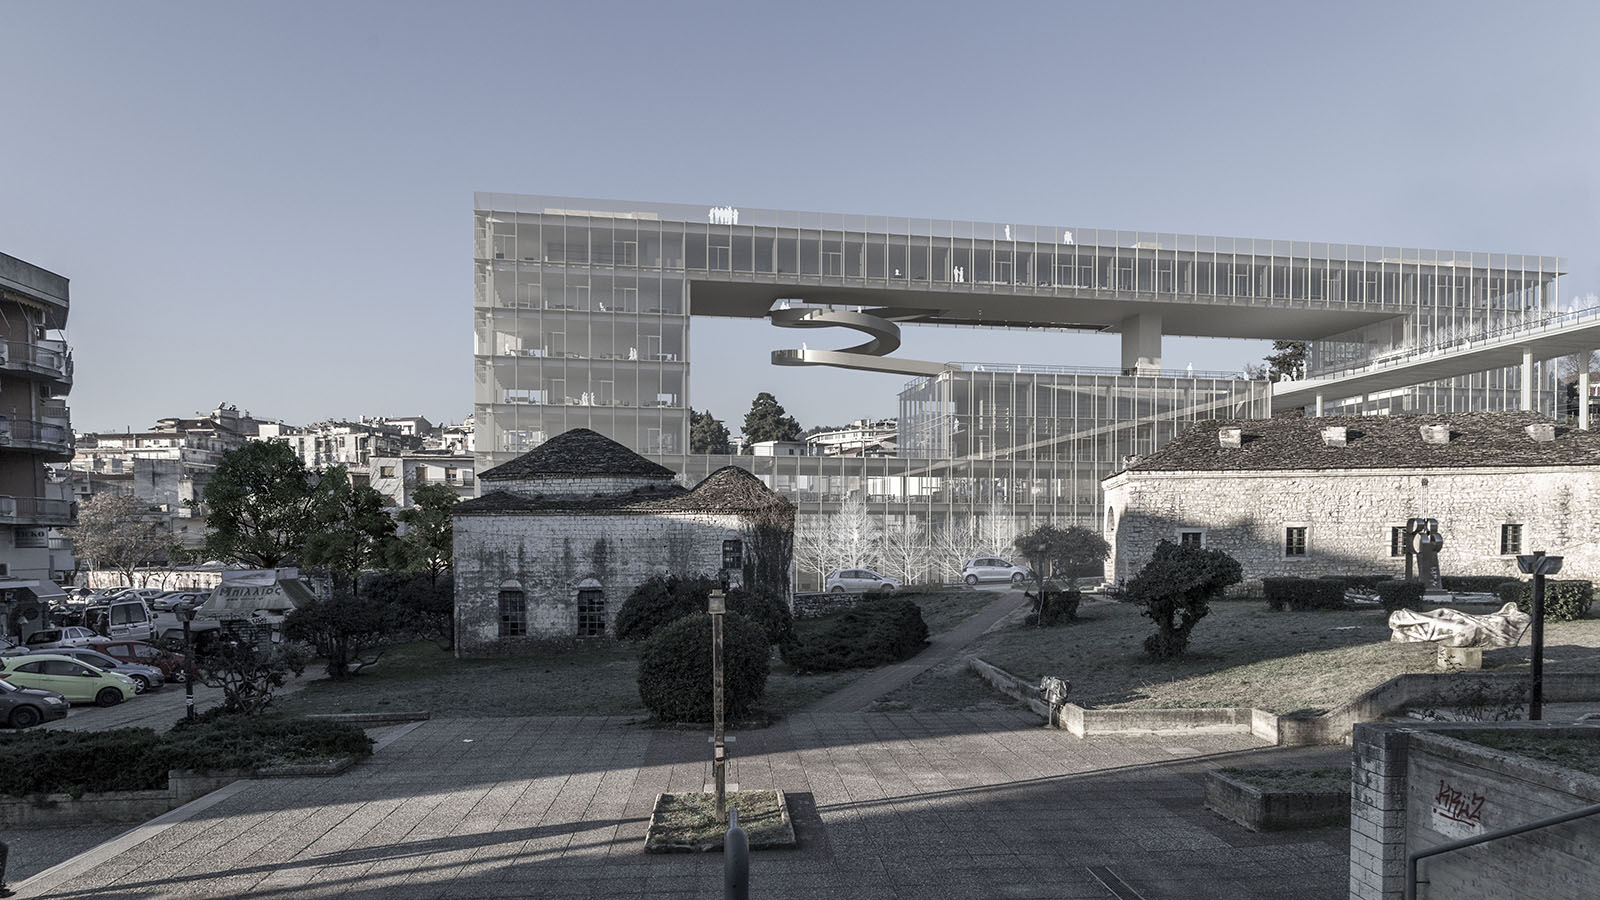 Archisearch The New City Hall of Ioannina | Diploma thesis by Athina Pappa, Stefanos Natsis